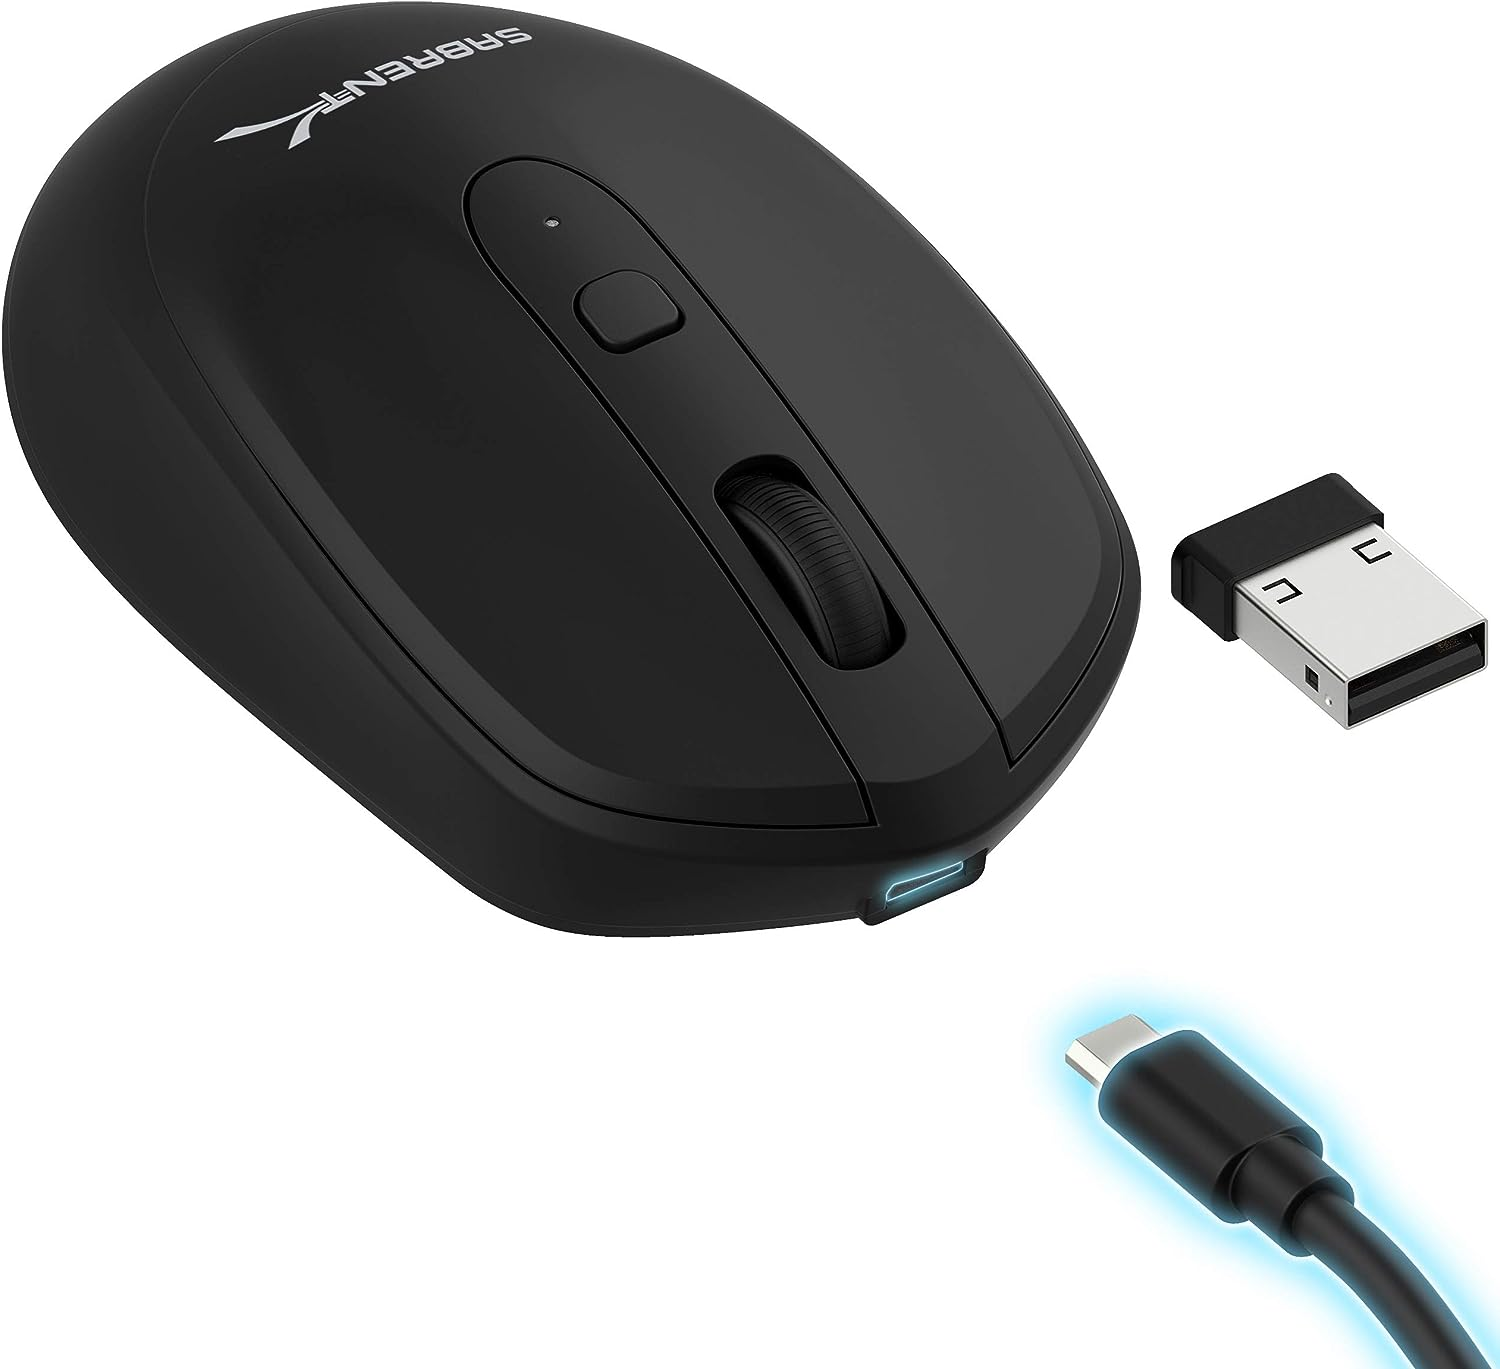 SABRENT 2.4GHz Rechargeable Wireless Mouse with Adjustable Resolution (MS-RCWM)